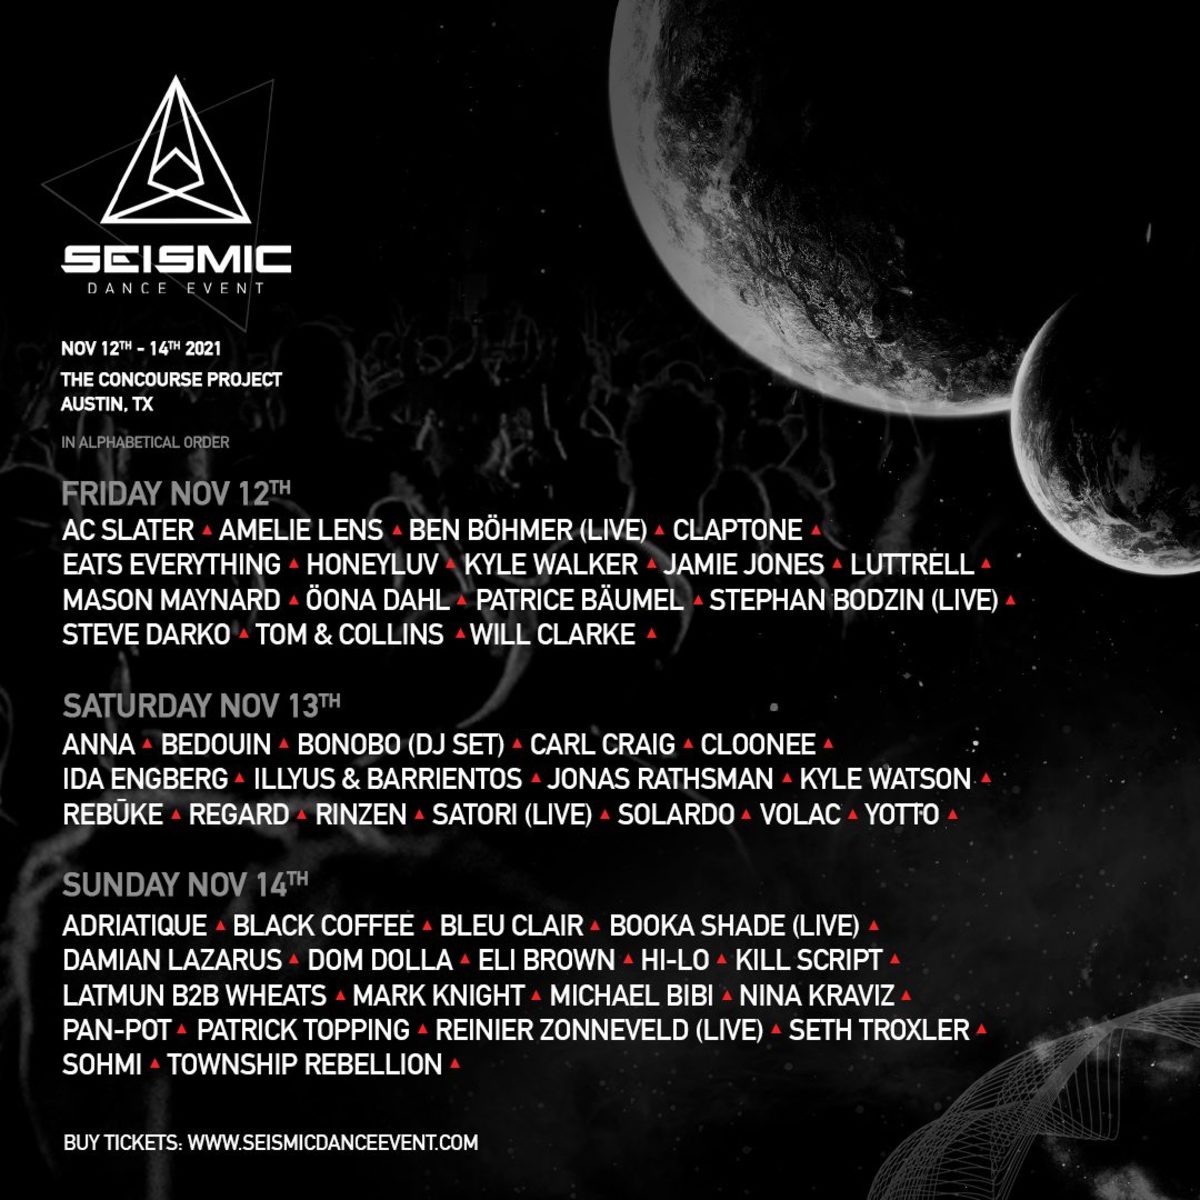 Seismic Dance Event flyer for their fourth edition running November 12th - 14th, 2021.